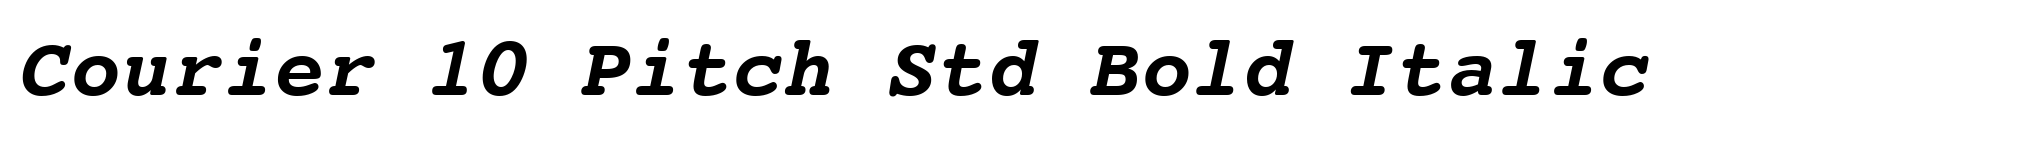 Courier 10 Pitch Std Bold Italic image